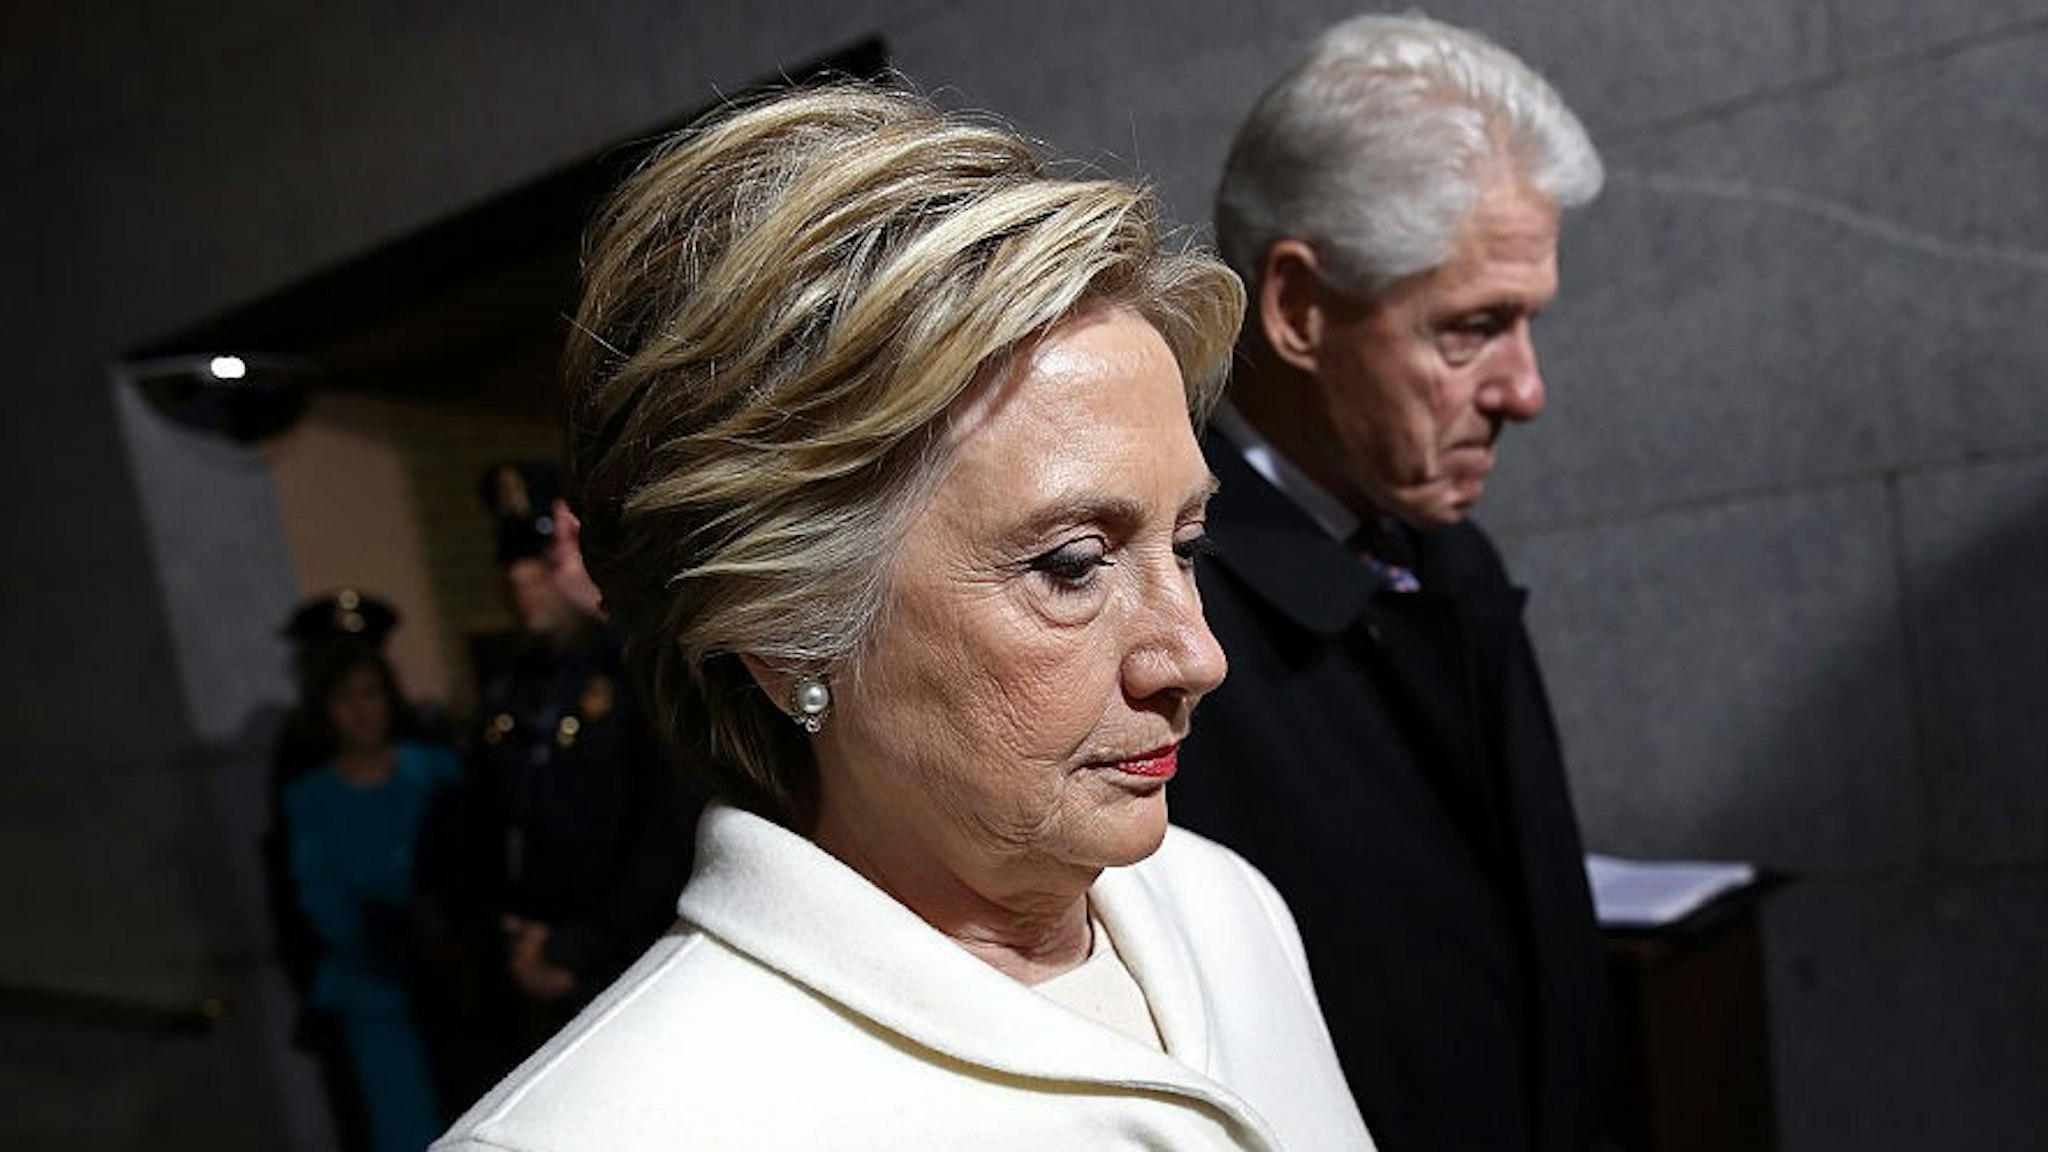 Former Democratic presidential nominee Hillary Clinton (L) and former President Bill Clinton arrive on the West Front of the U.S. Capitol on January 20, 2017 in Washington, DC. In today's inauguration ceremony Donald J. Trump becomes the 45th president of the United States.